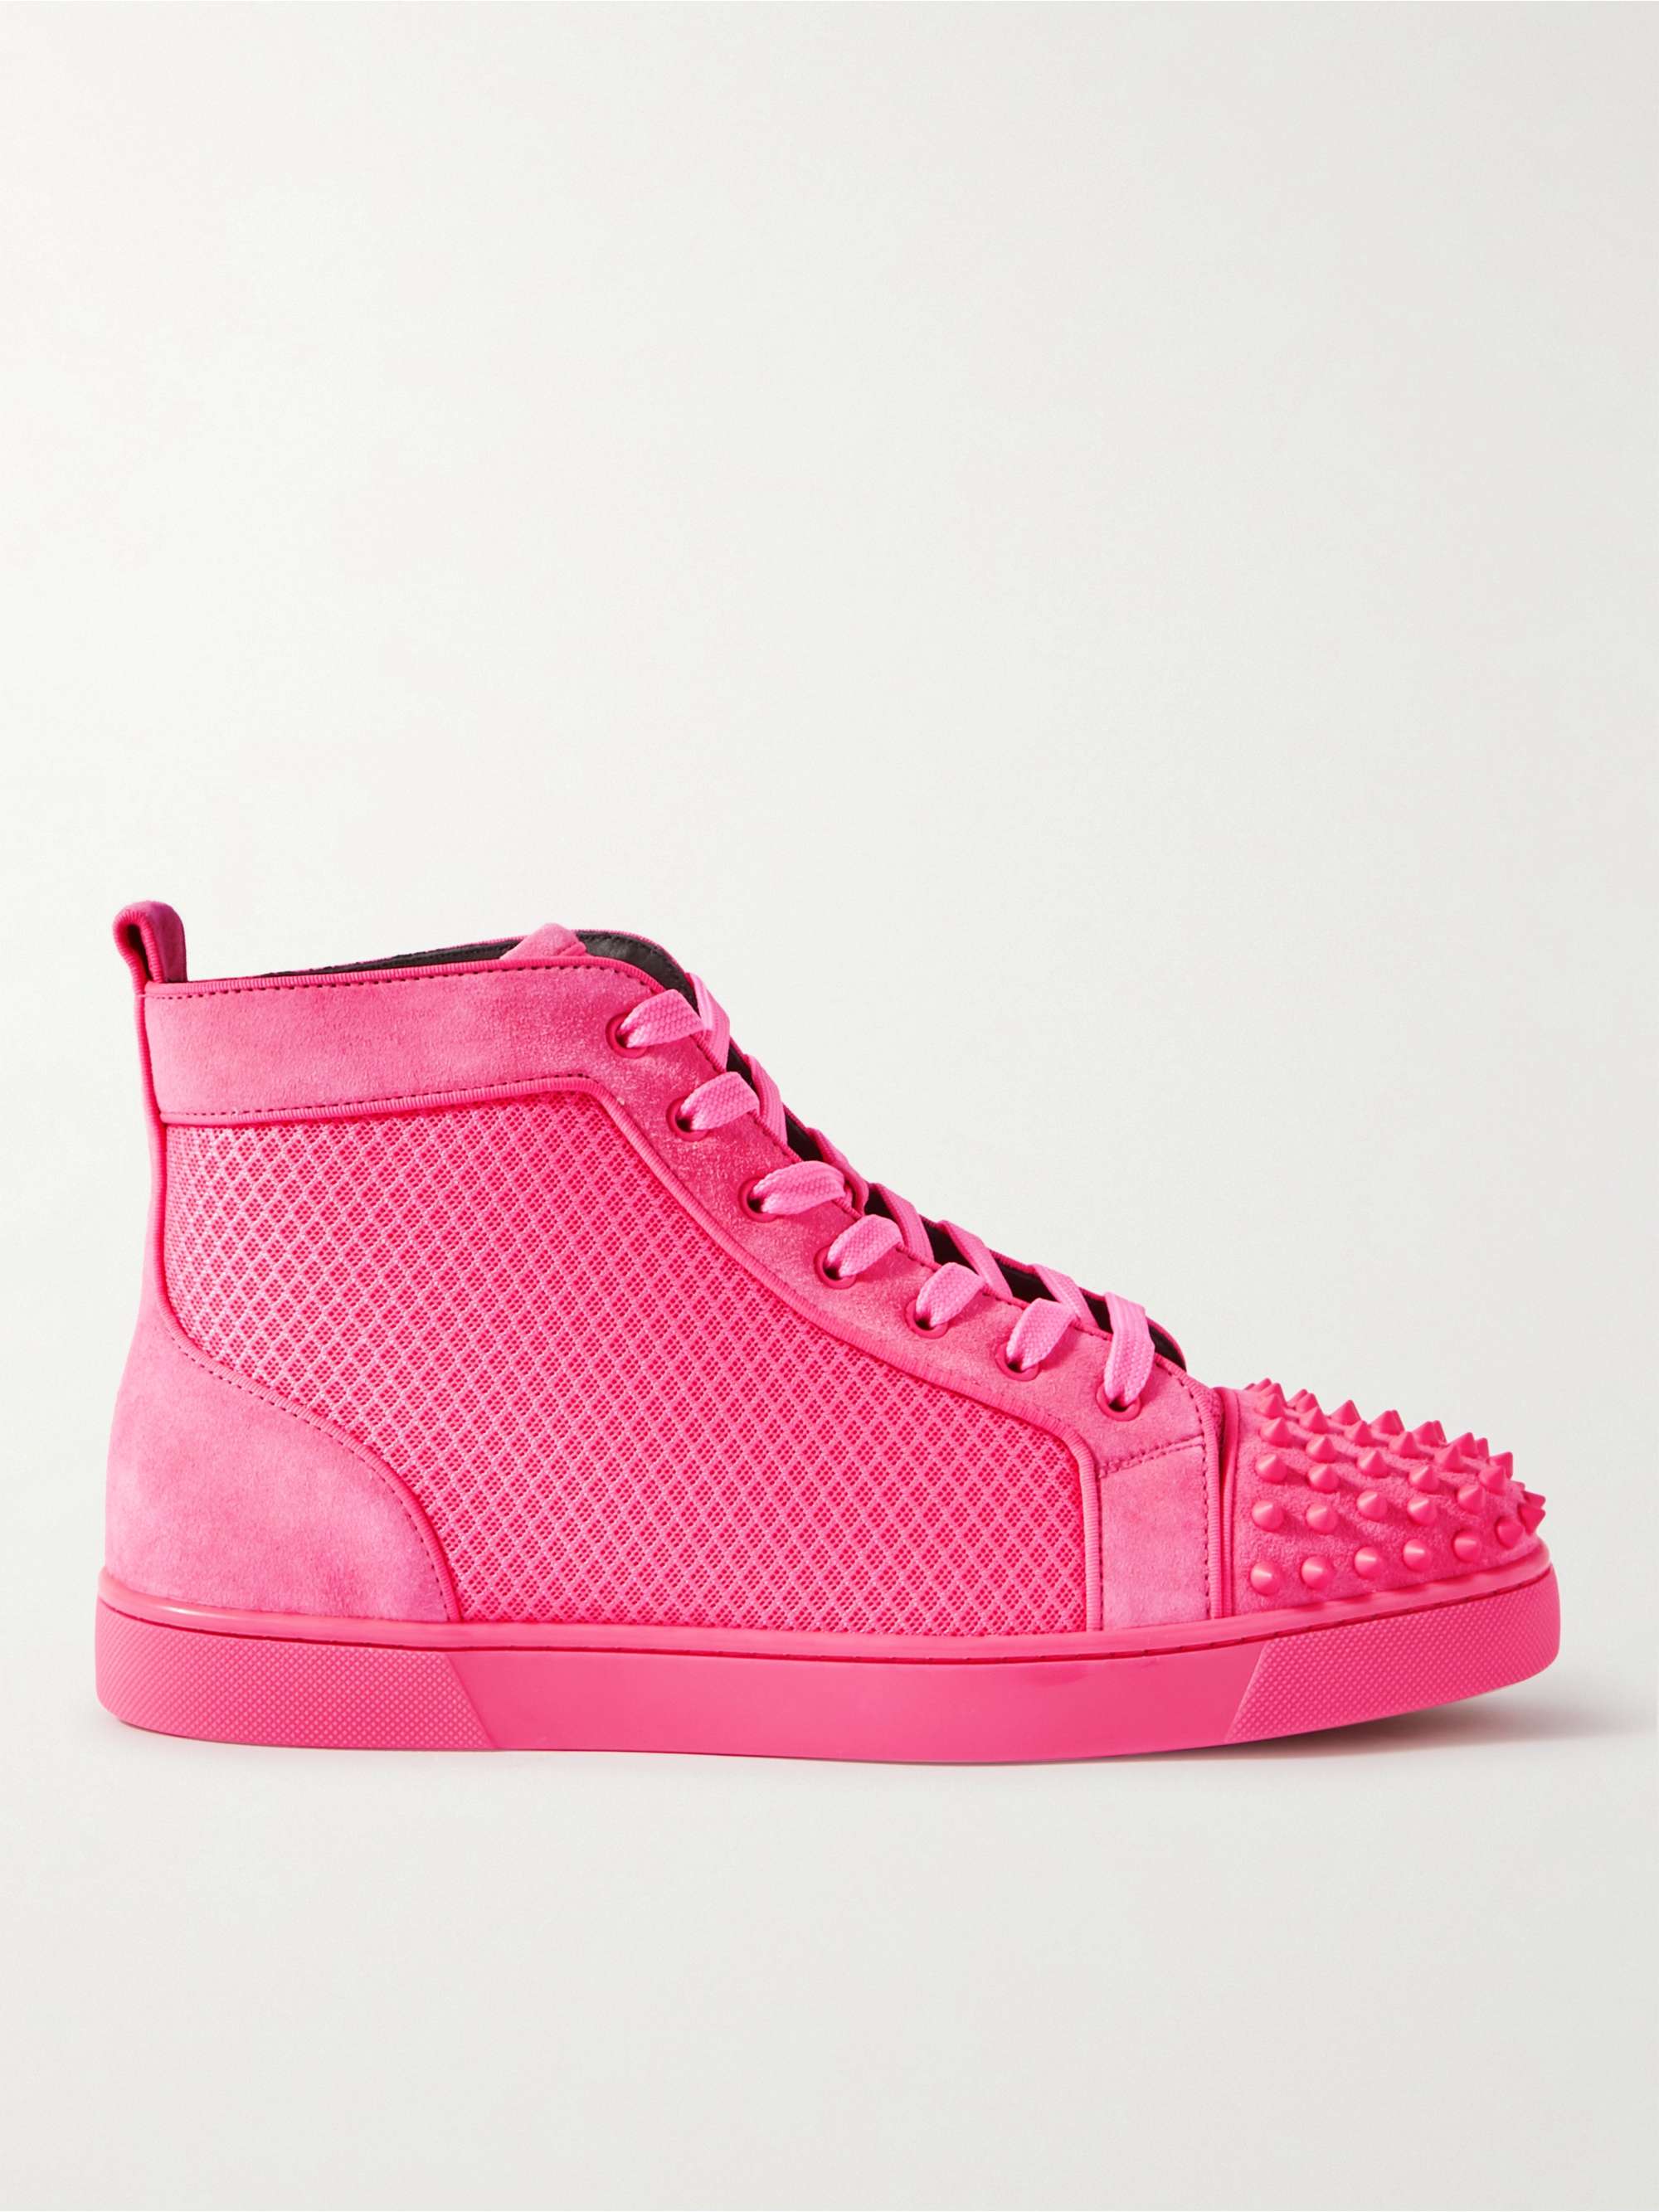 Pink Louis Spiked Suede-Trimmed Mesh High-Top Sneakers | CHRISTIAN LOUBOUTIN  | MR PORTER